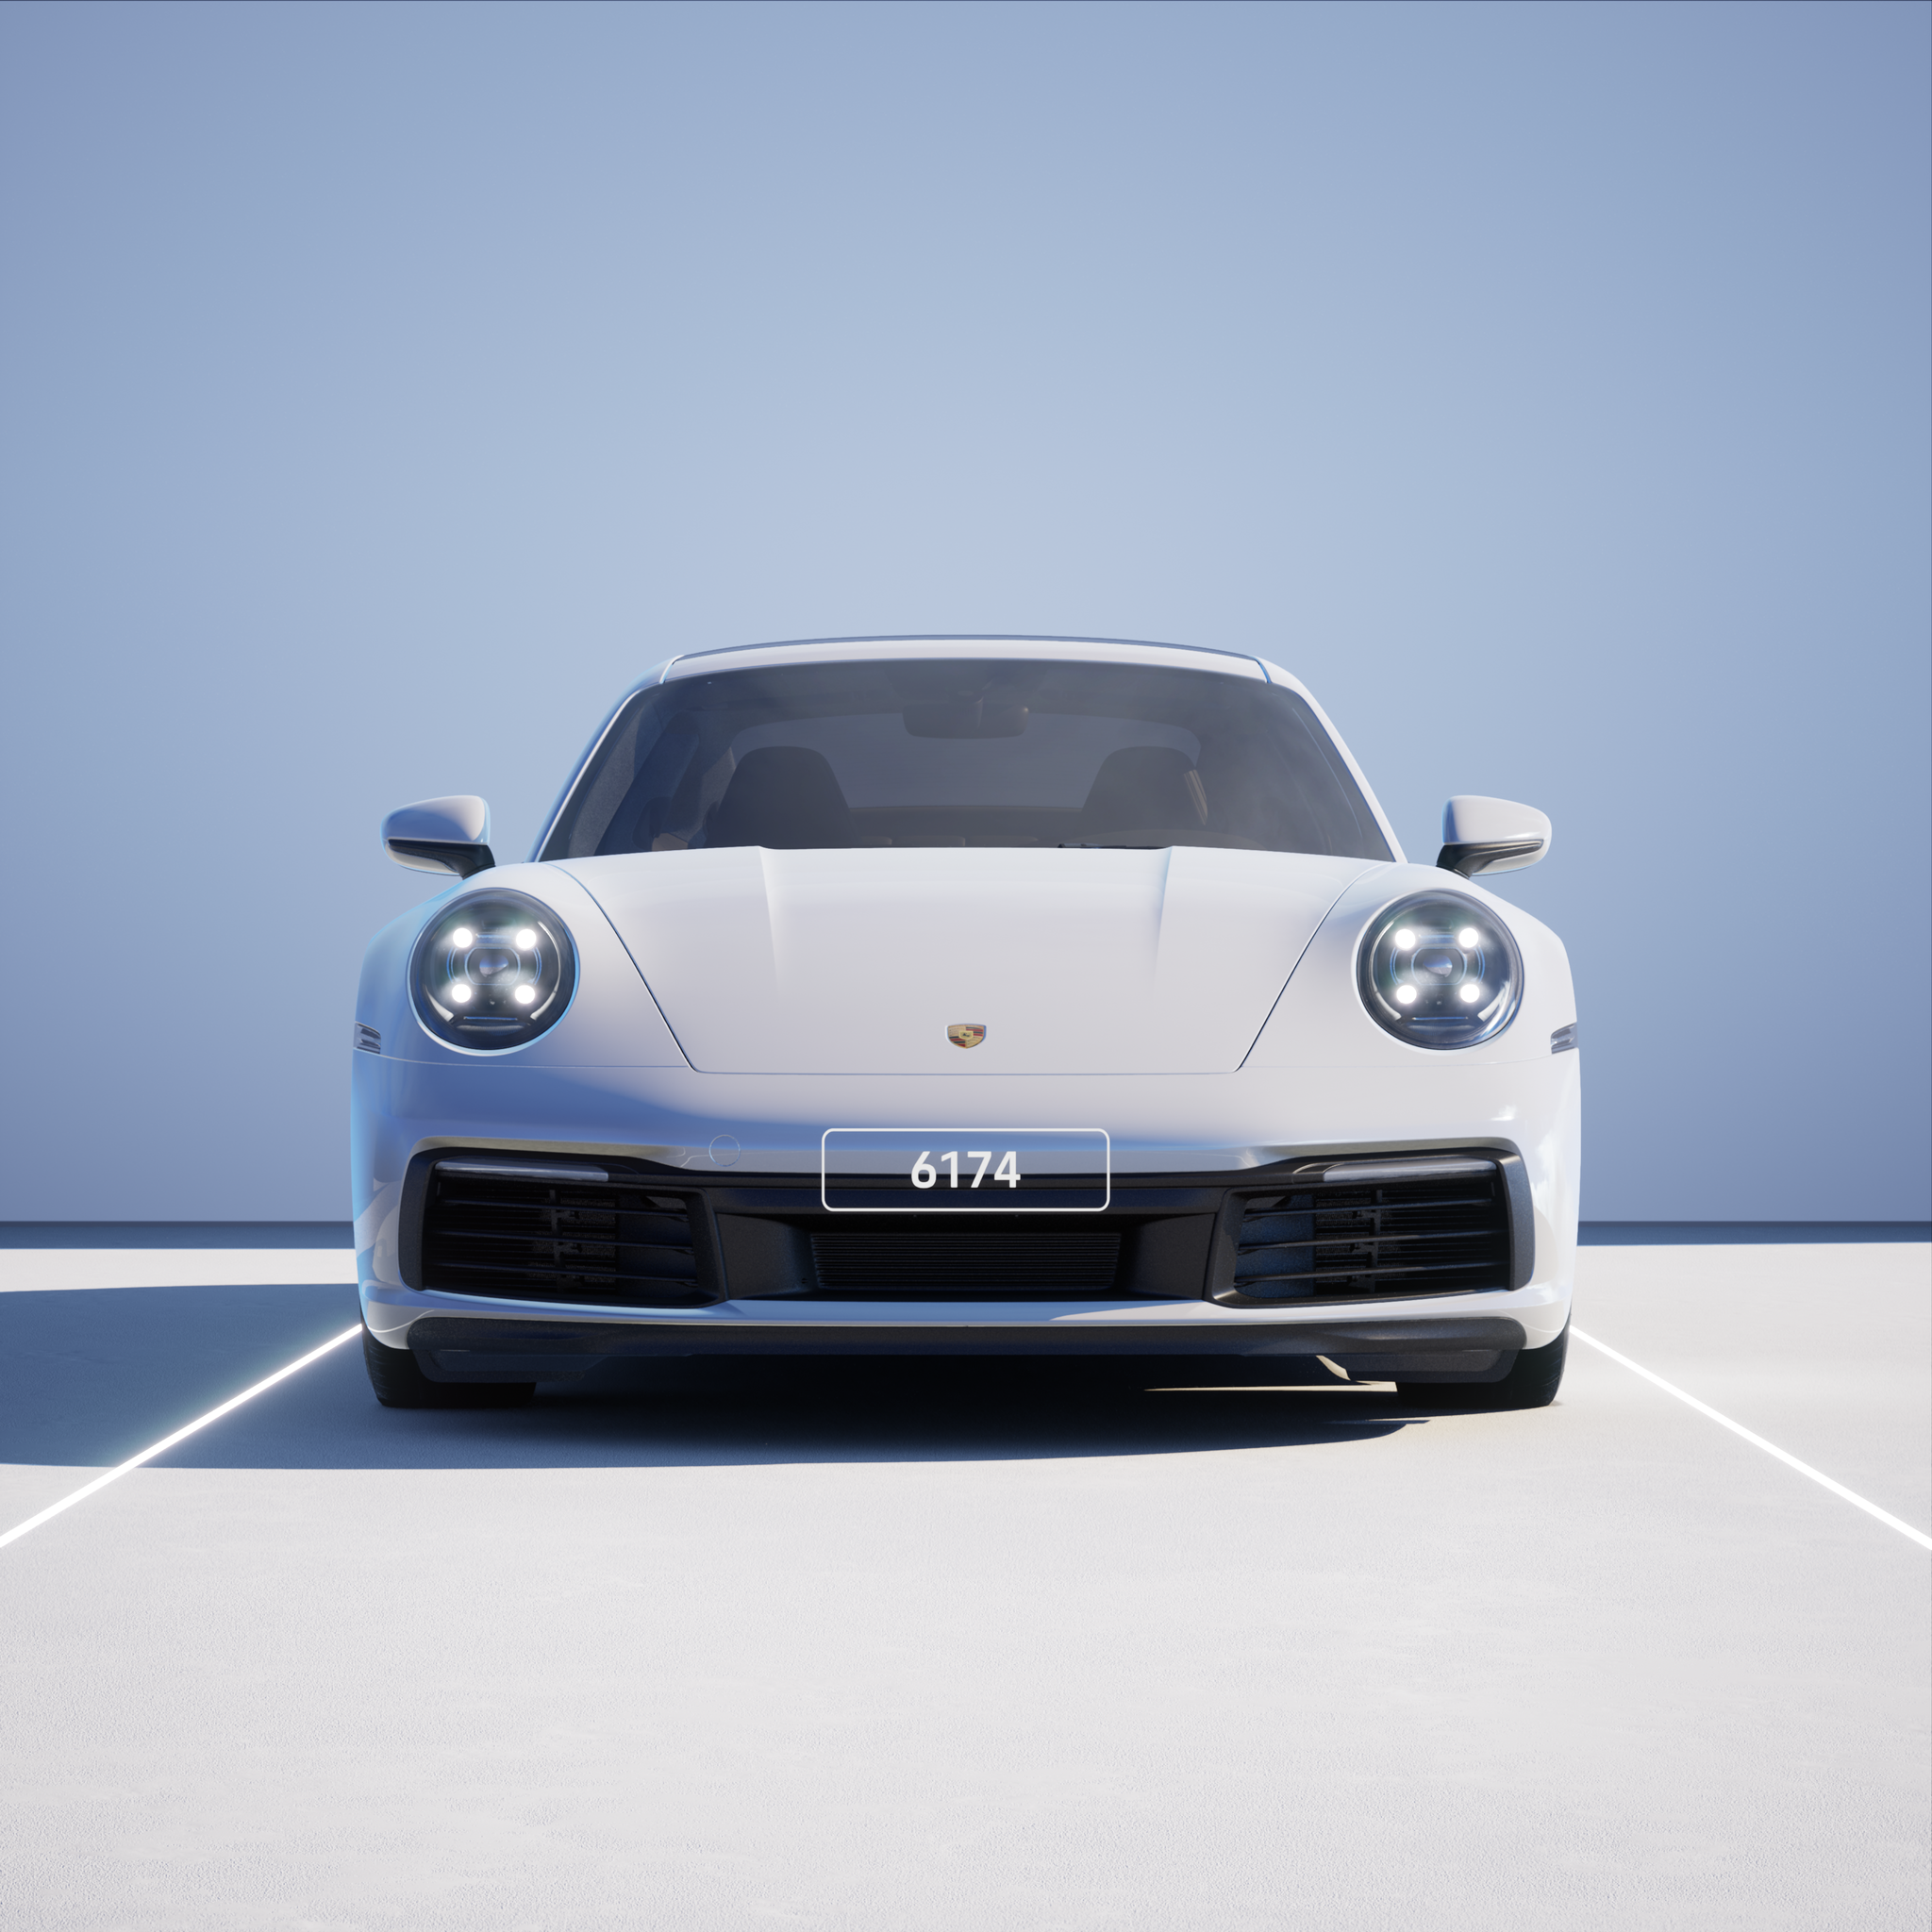 The PORSCHΞ 911 6174 image in phase